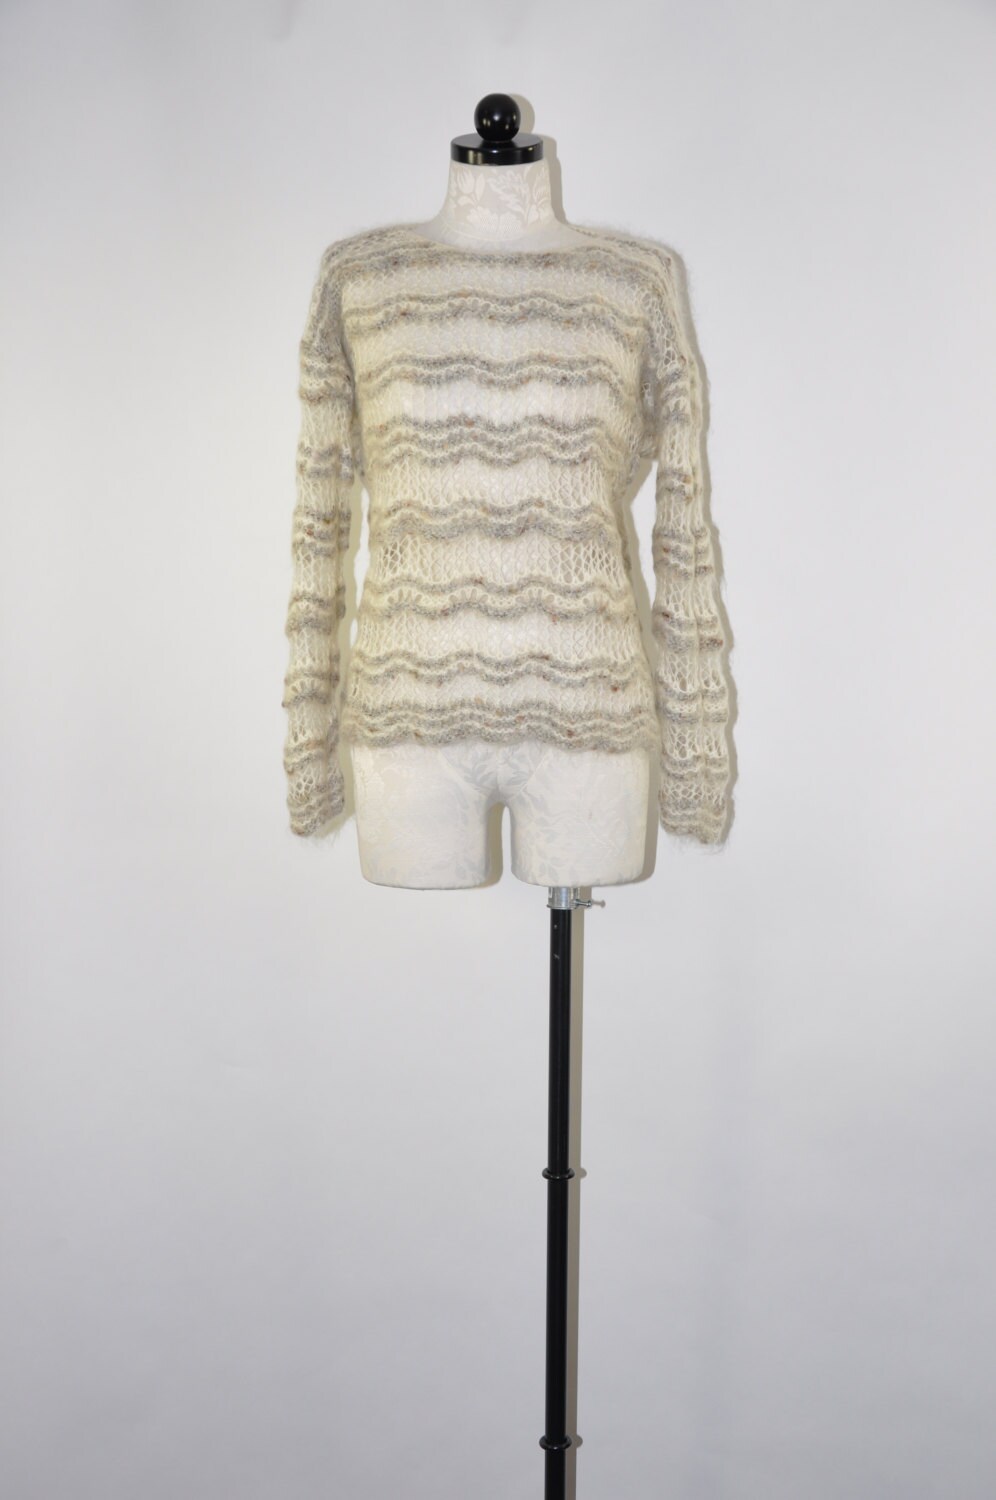 gray striped mohair sweater / fuzzy netting sweater / 90s